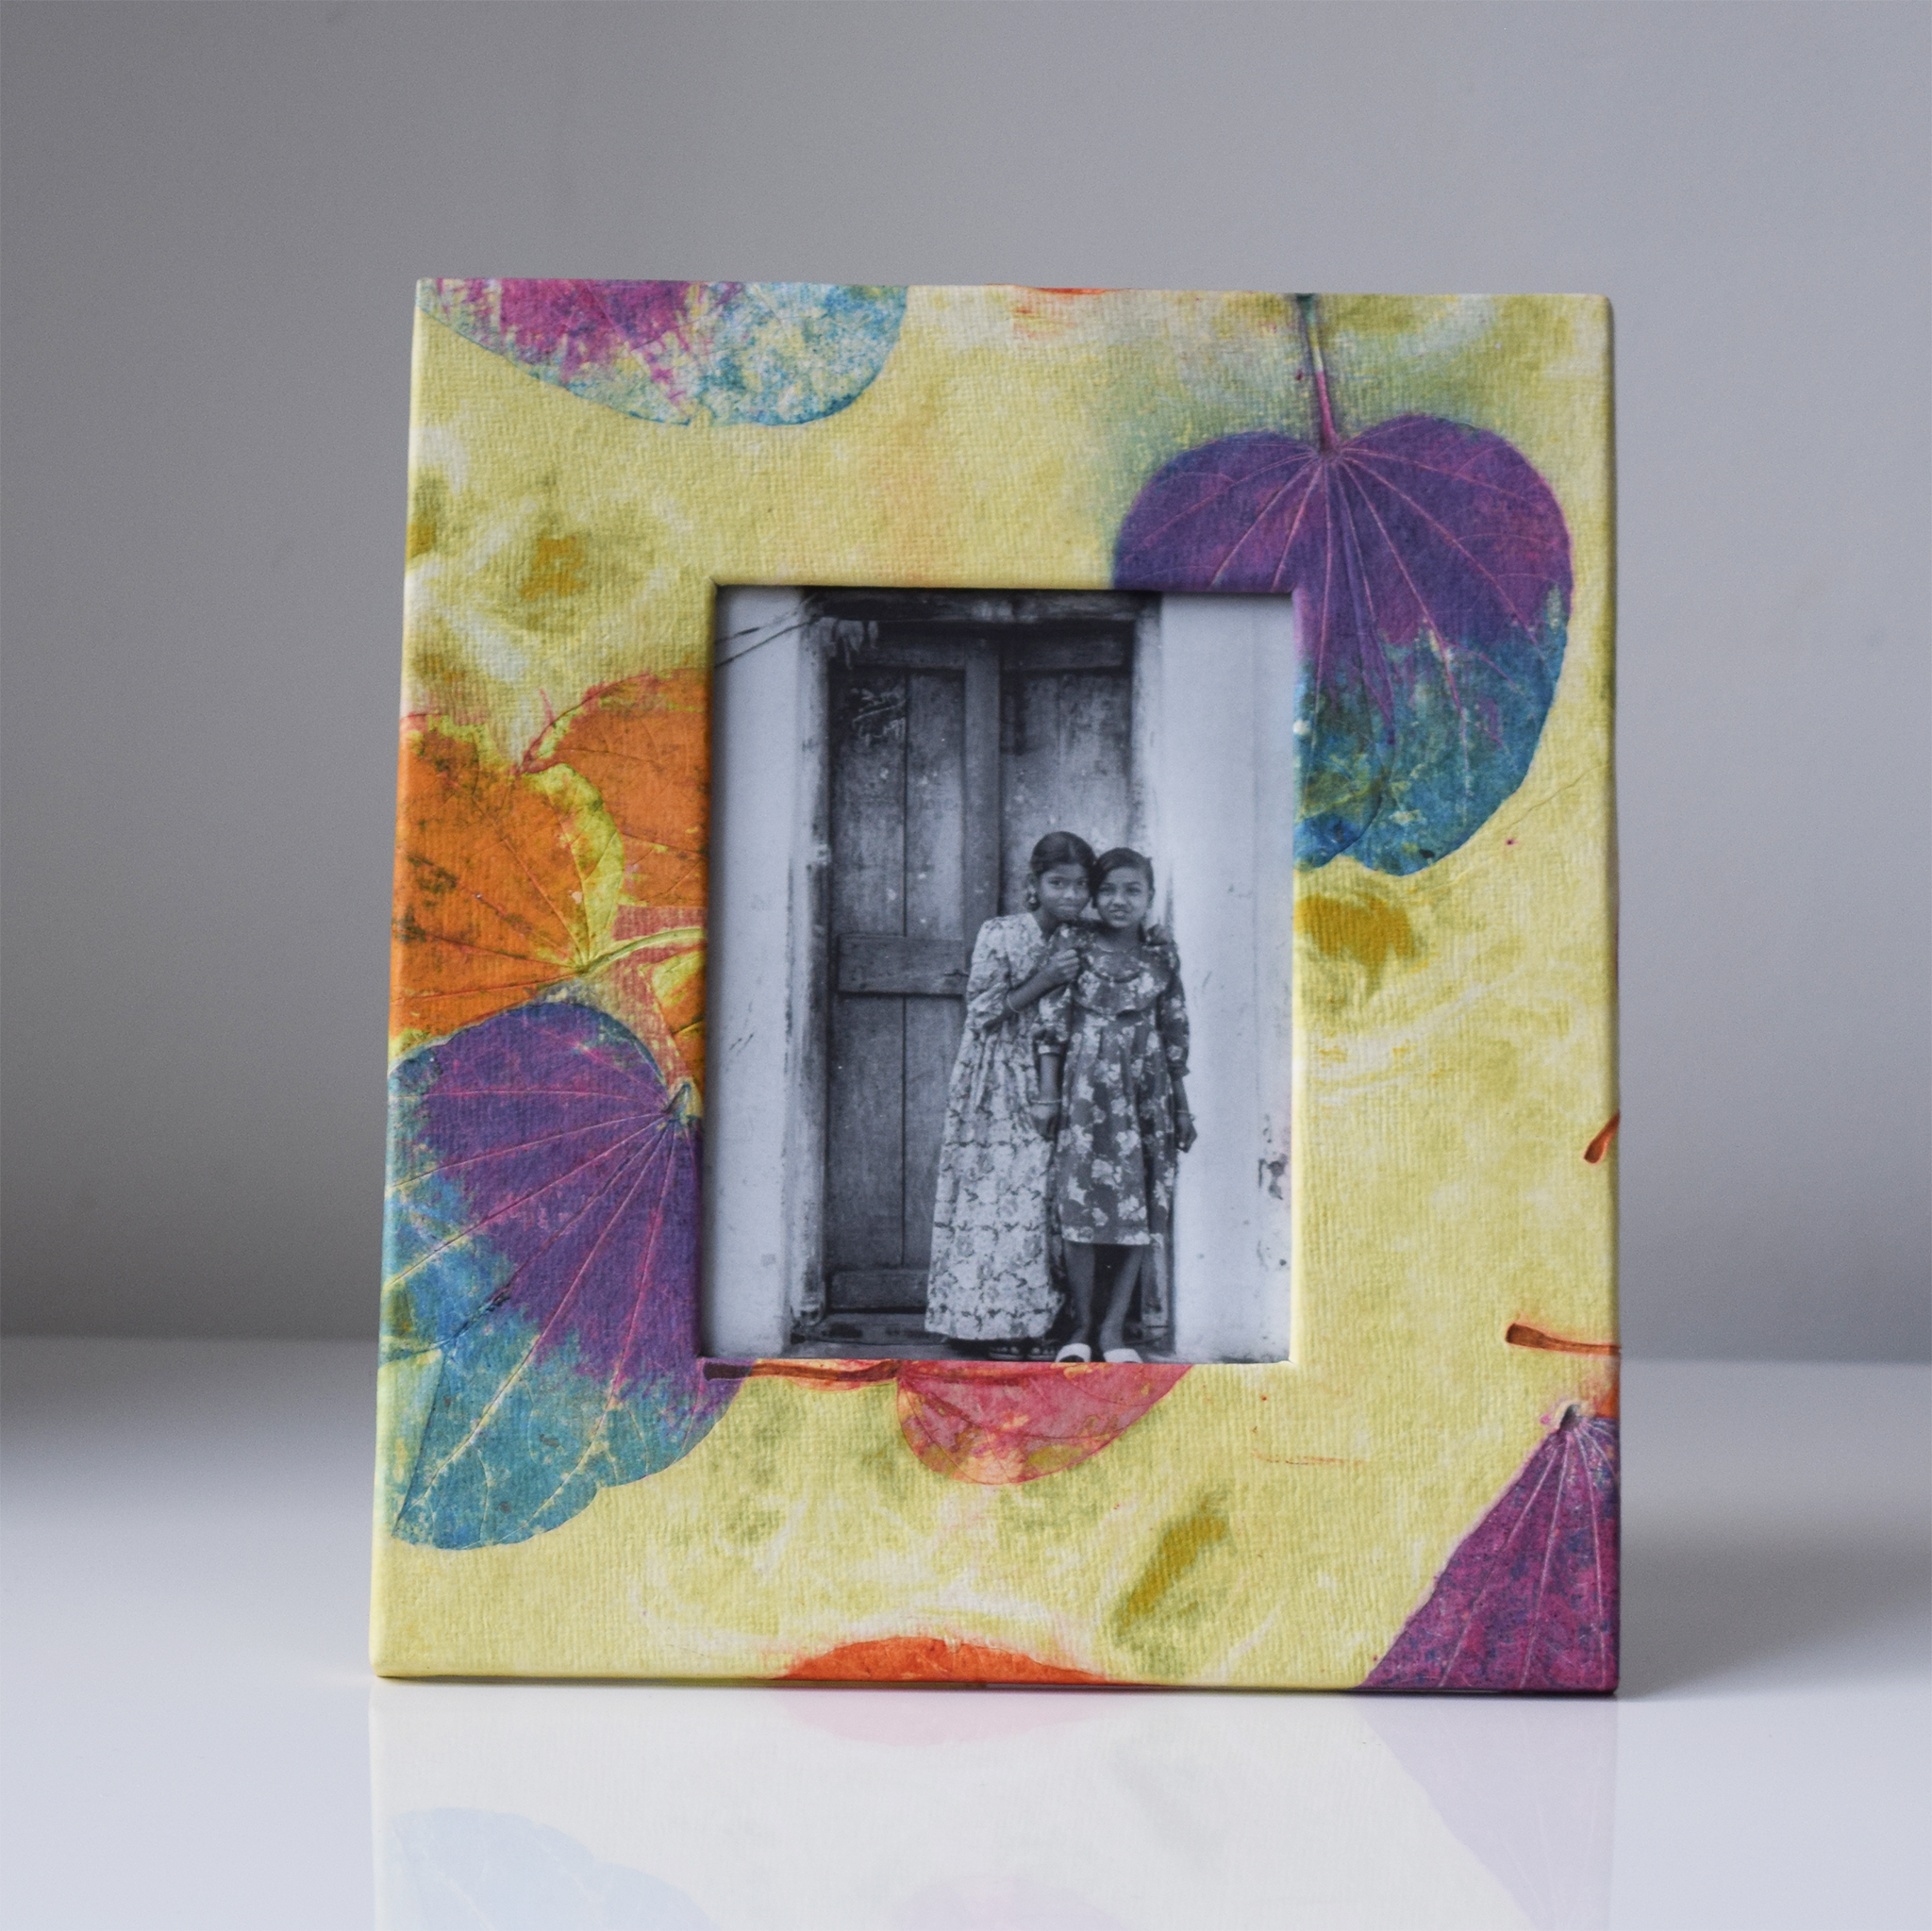 green, purple and orange handmade paper picture frame